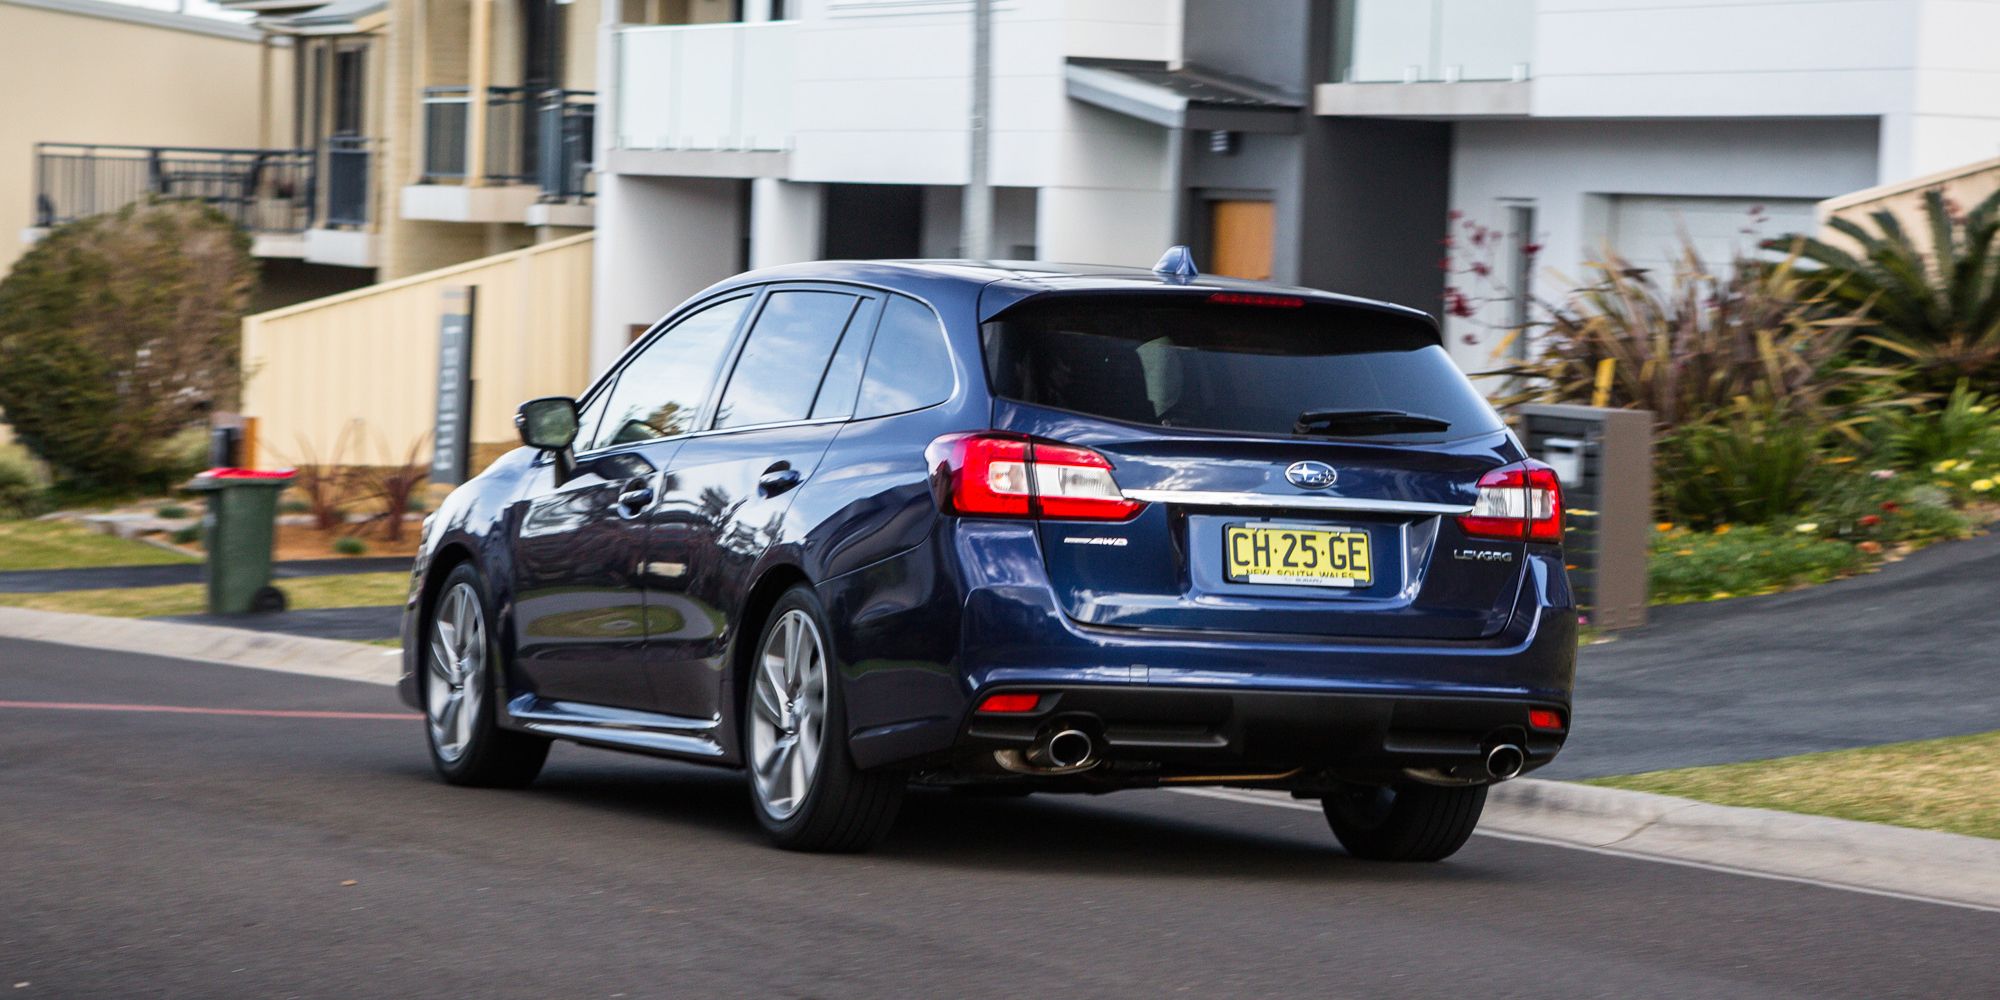 The rear of the Levorg